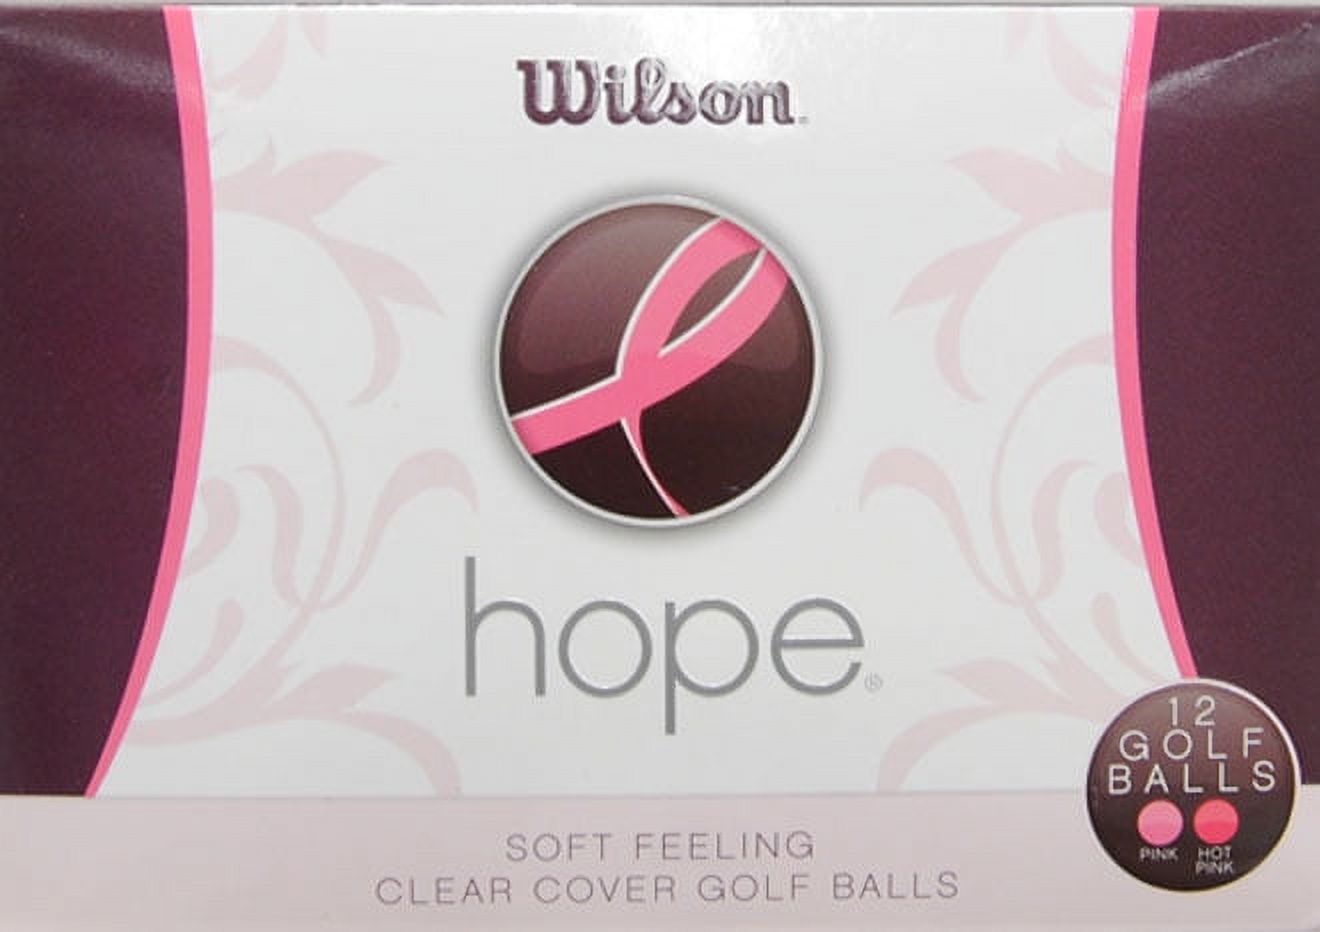 Wilson Hope Golf Balls, Assorted Colors, 12 Pack - image 2 of 6